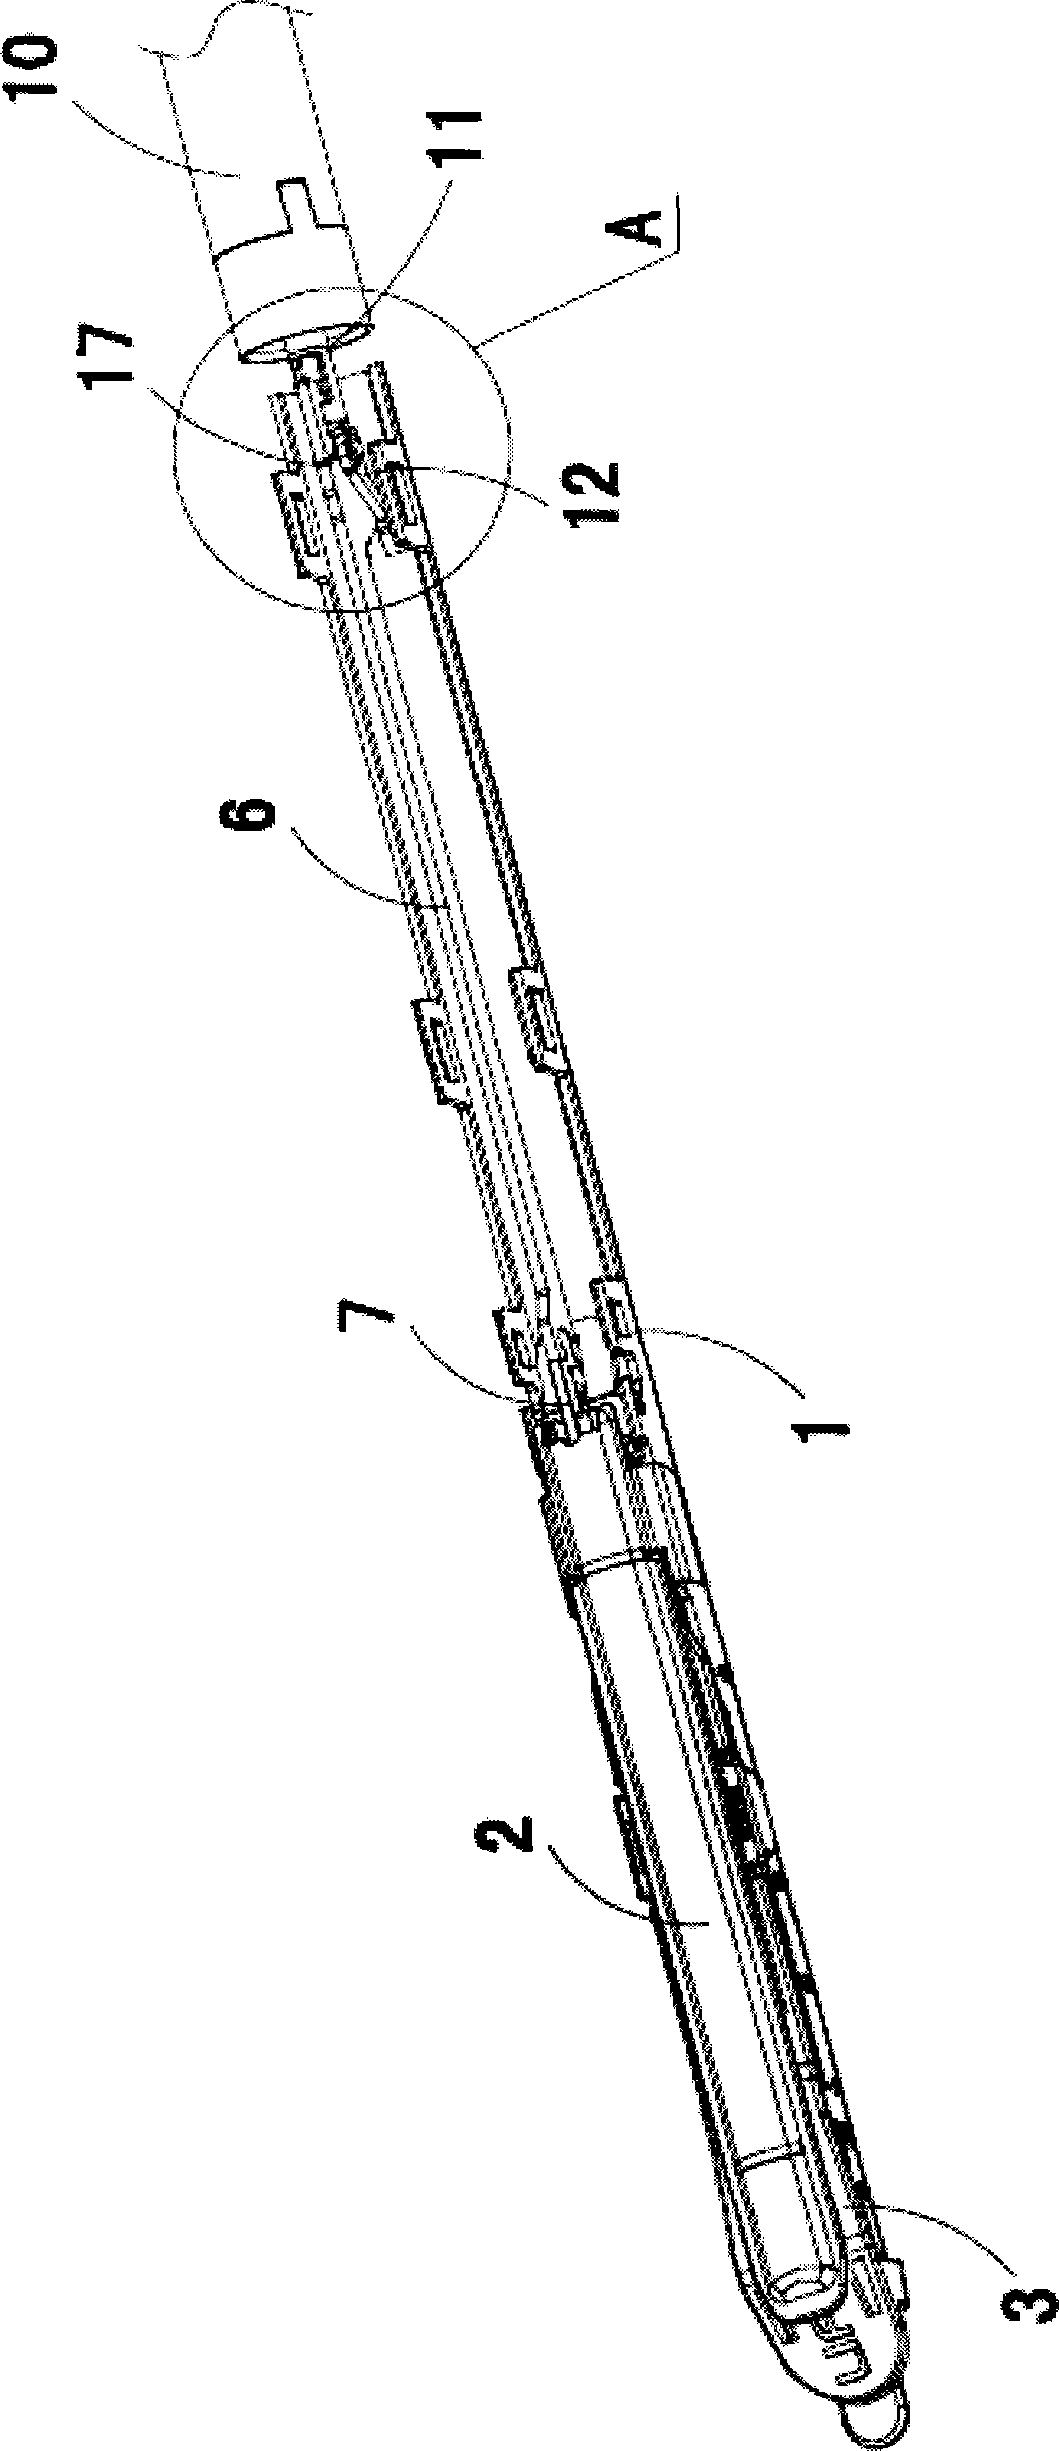 Staple head assembly of linear suturing and excising device